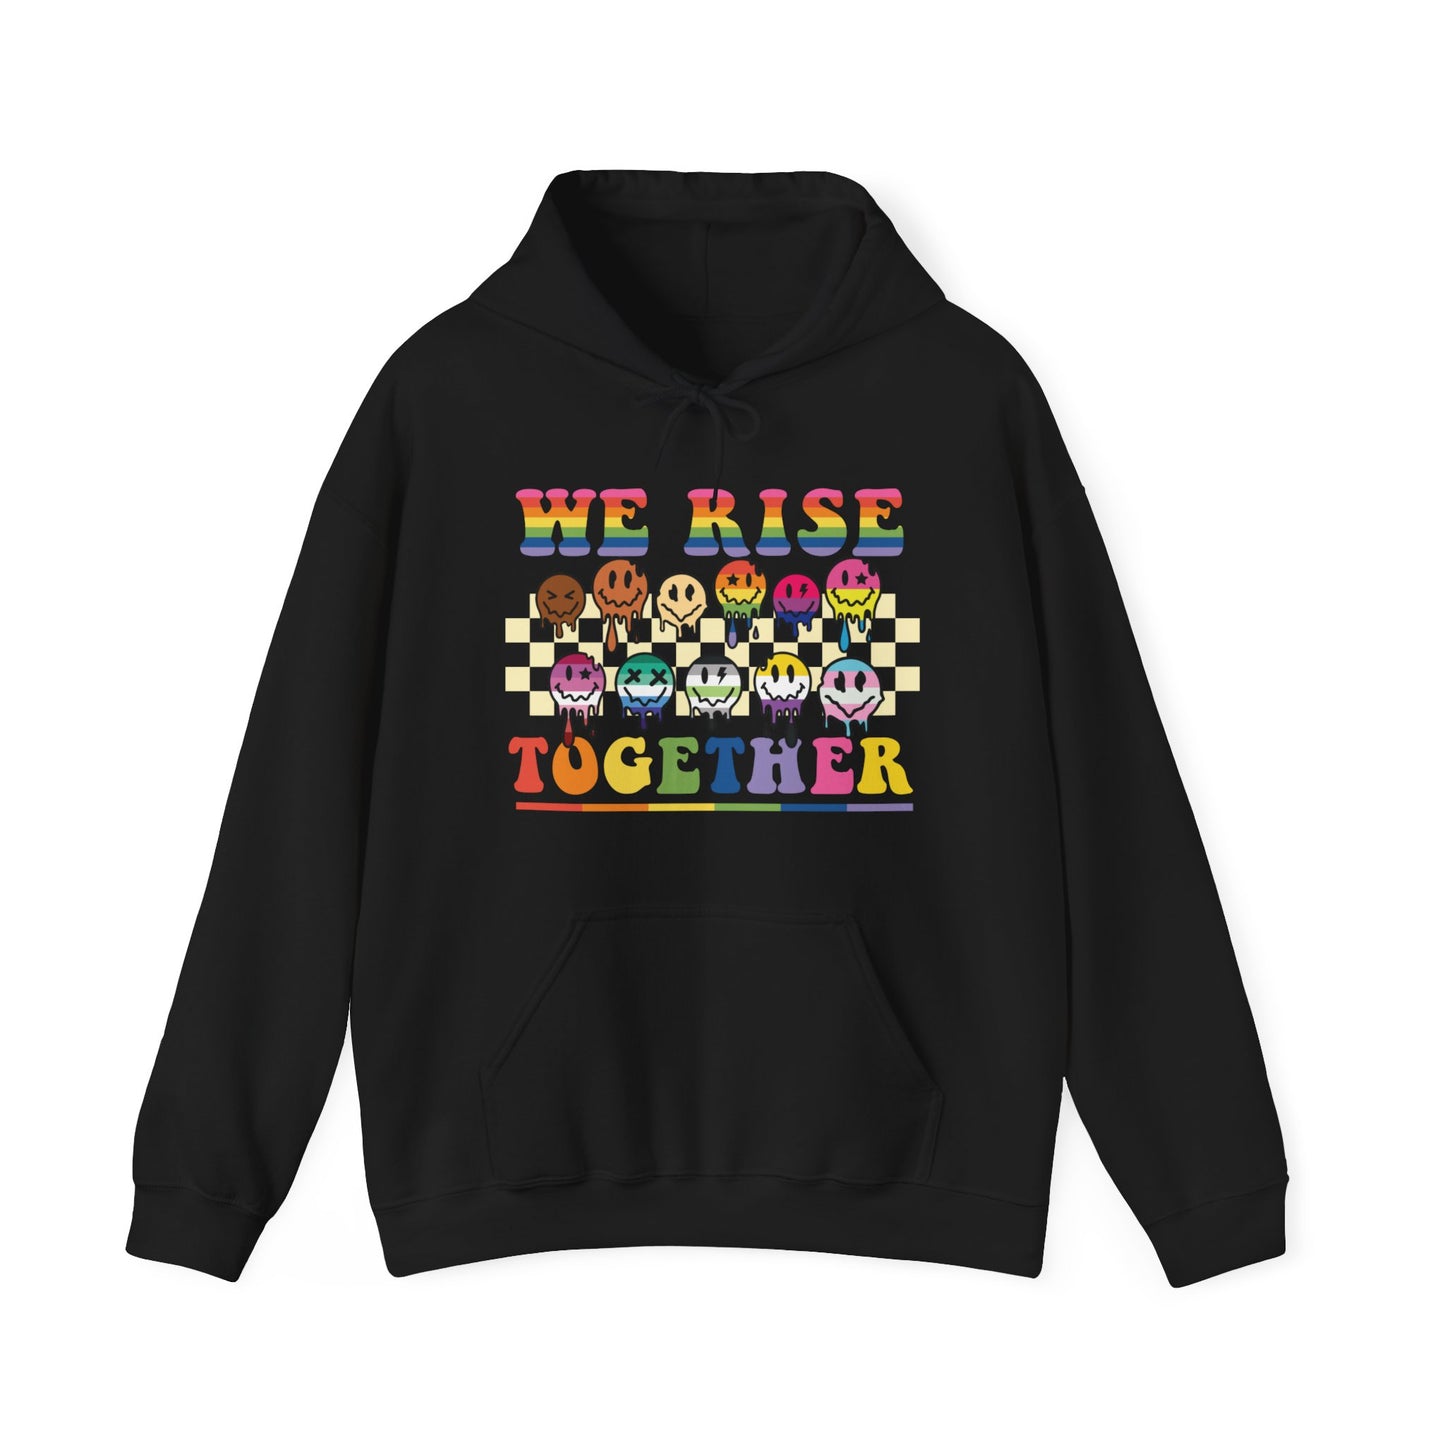 We Rise Together Hoodie - Equality Trading Post 